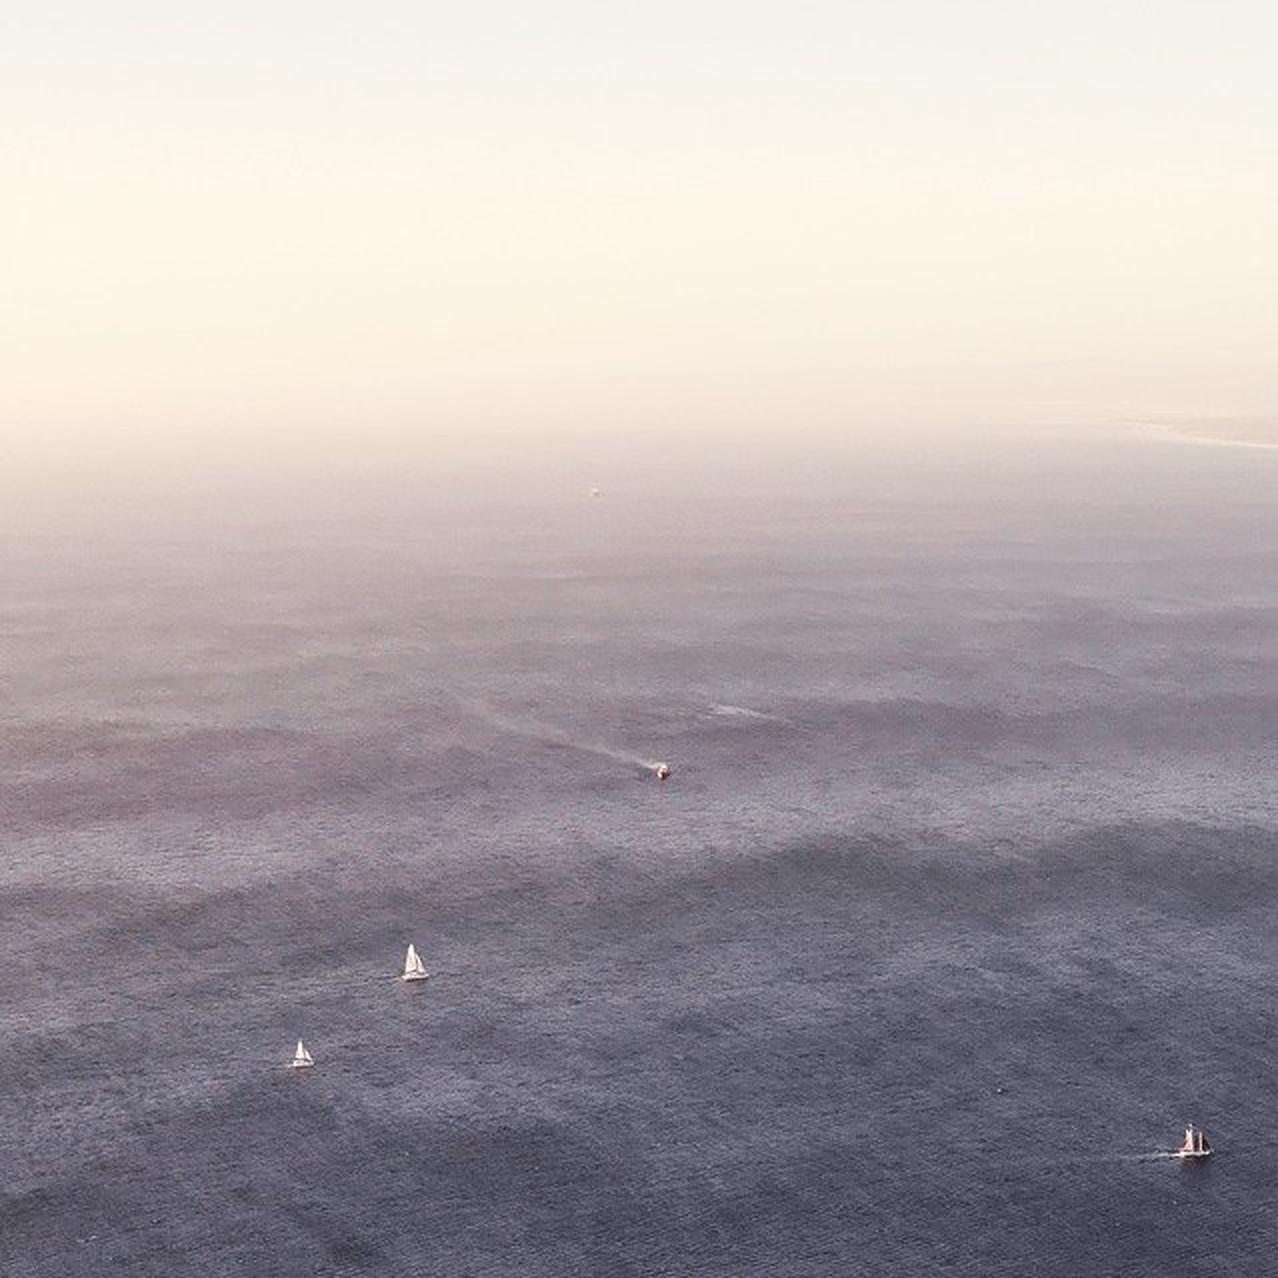 Please bear in mind that all prints are produced to order and lead times are between 15-20 days.

Sailboats is a stunning Archival Inkjet Print by contemporary photographer Morgan Silk.
It is available in this size in an Edition of 25, and is sold